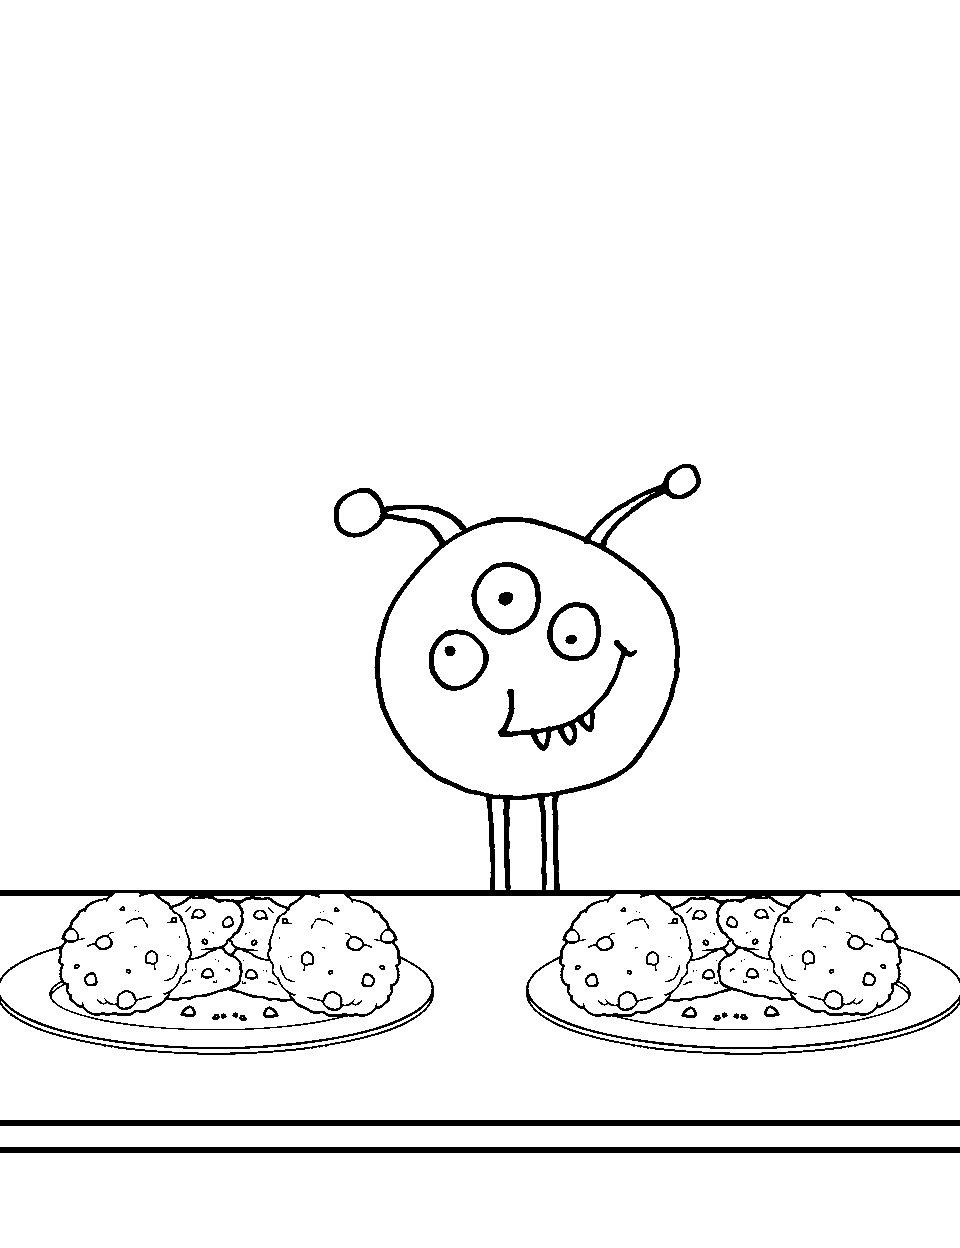 Monster Baking Cookies Coloring Page - A cookie monster ready to eat freshly baked cookies.